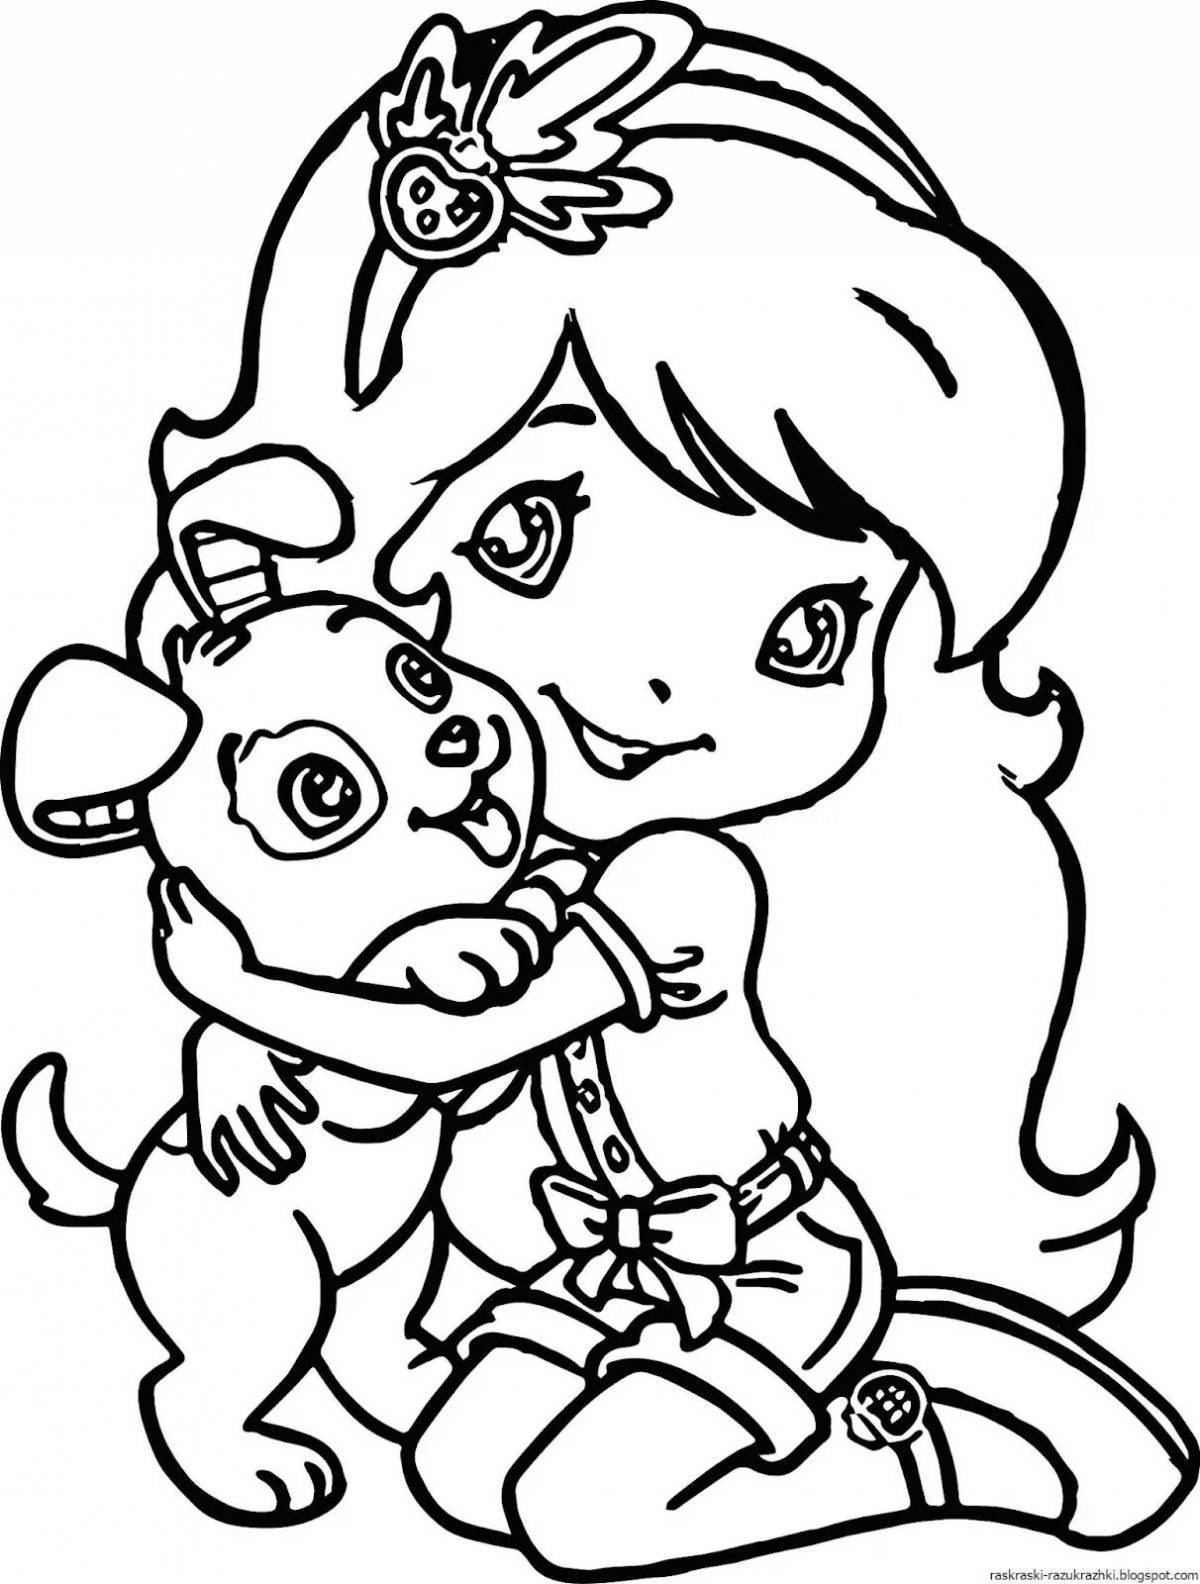 Color explosion coloring pages